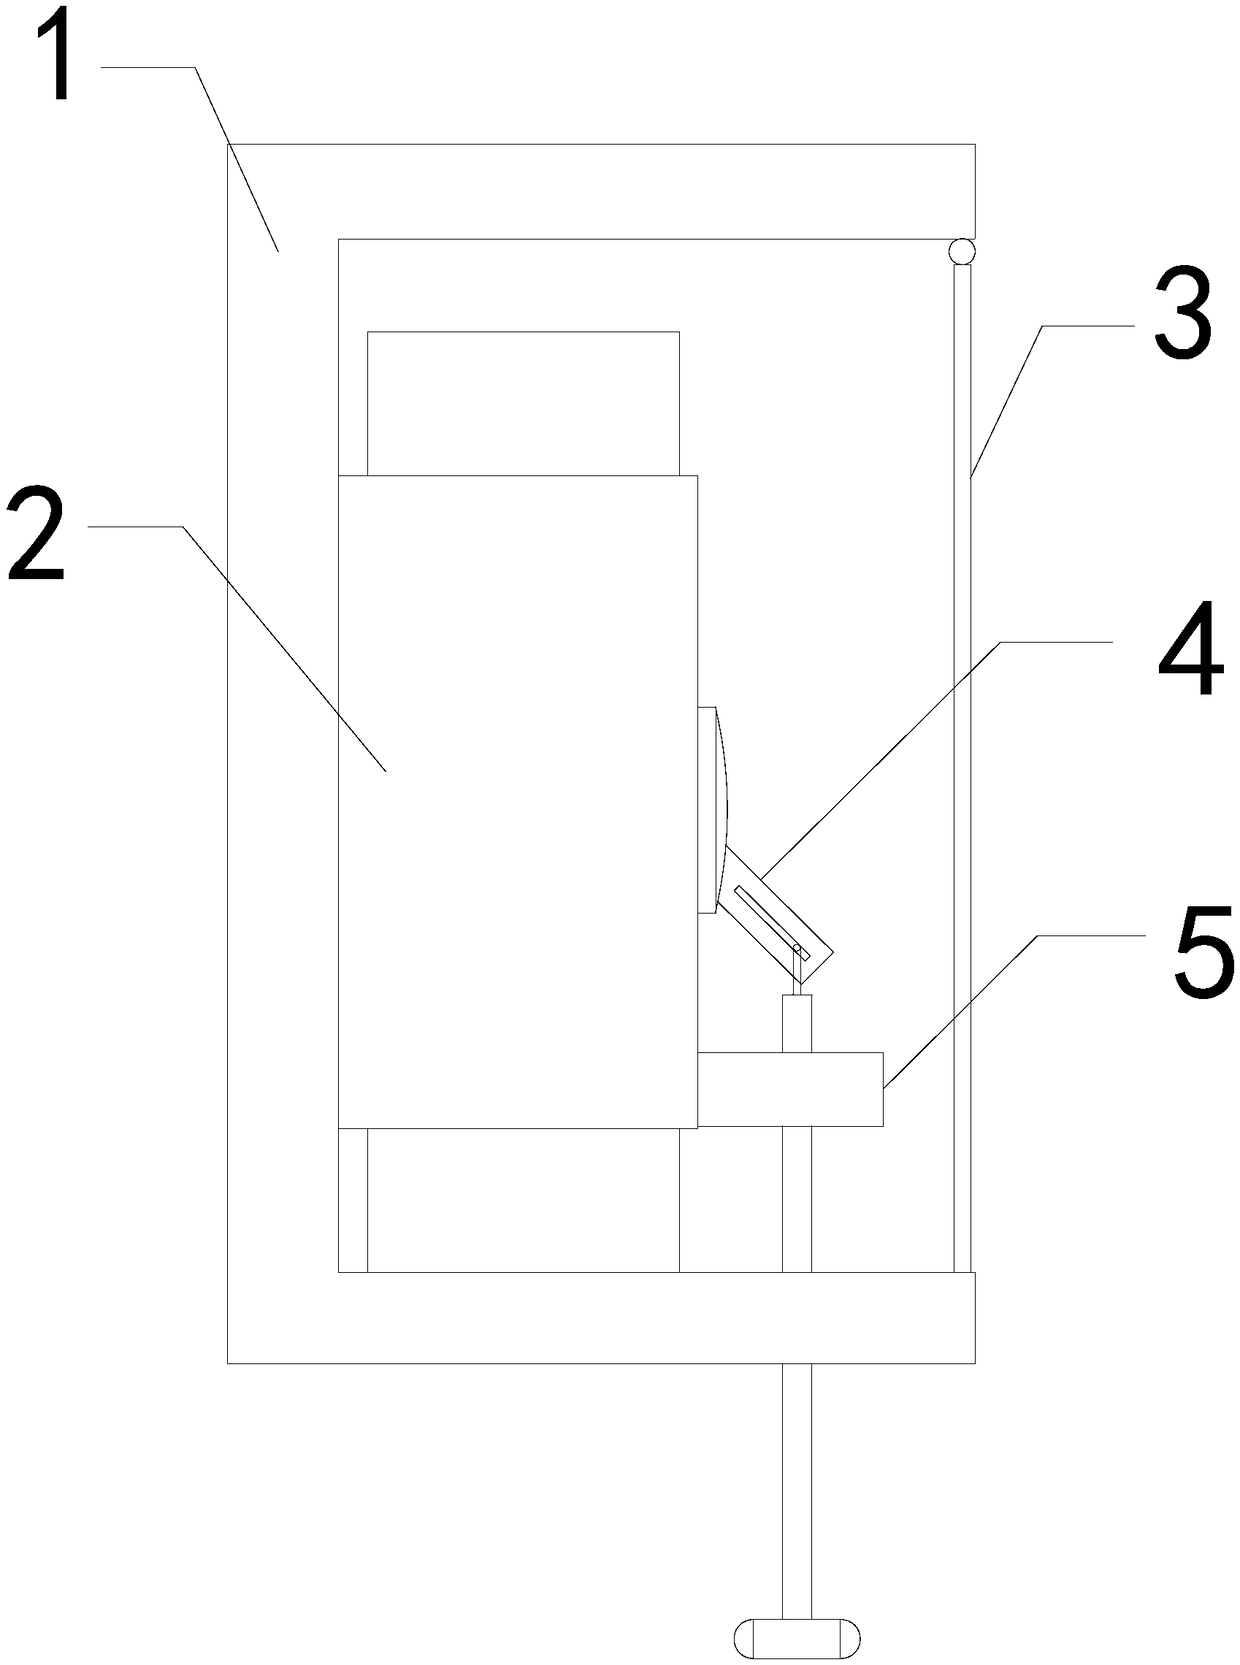 Miniature circuit breaker breaking and closing mechanism capable of spirally controlling speed